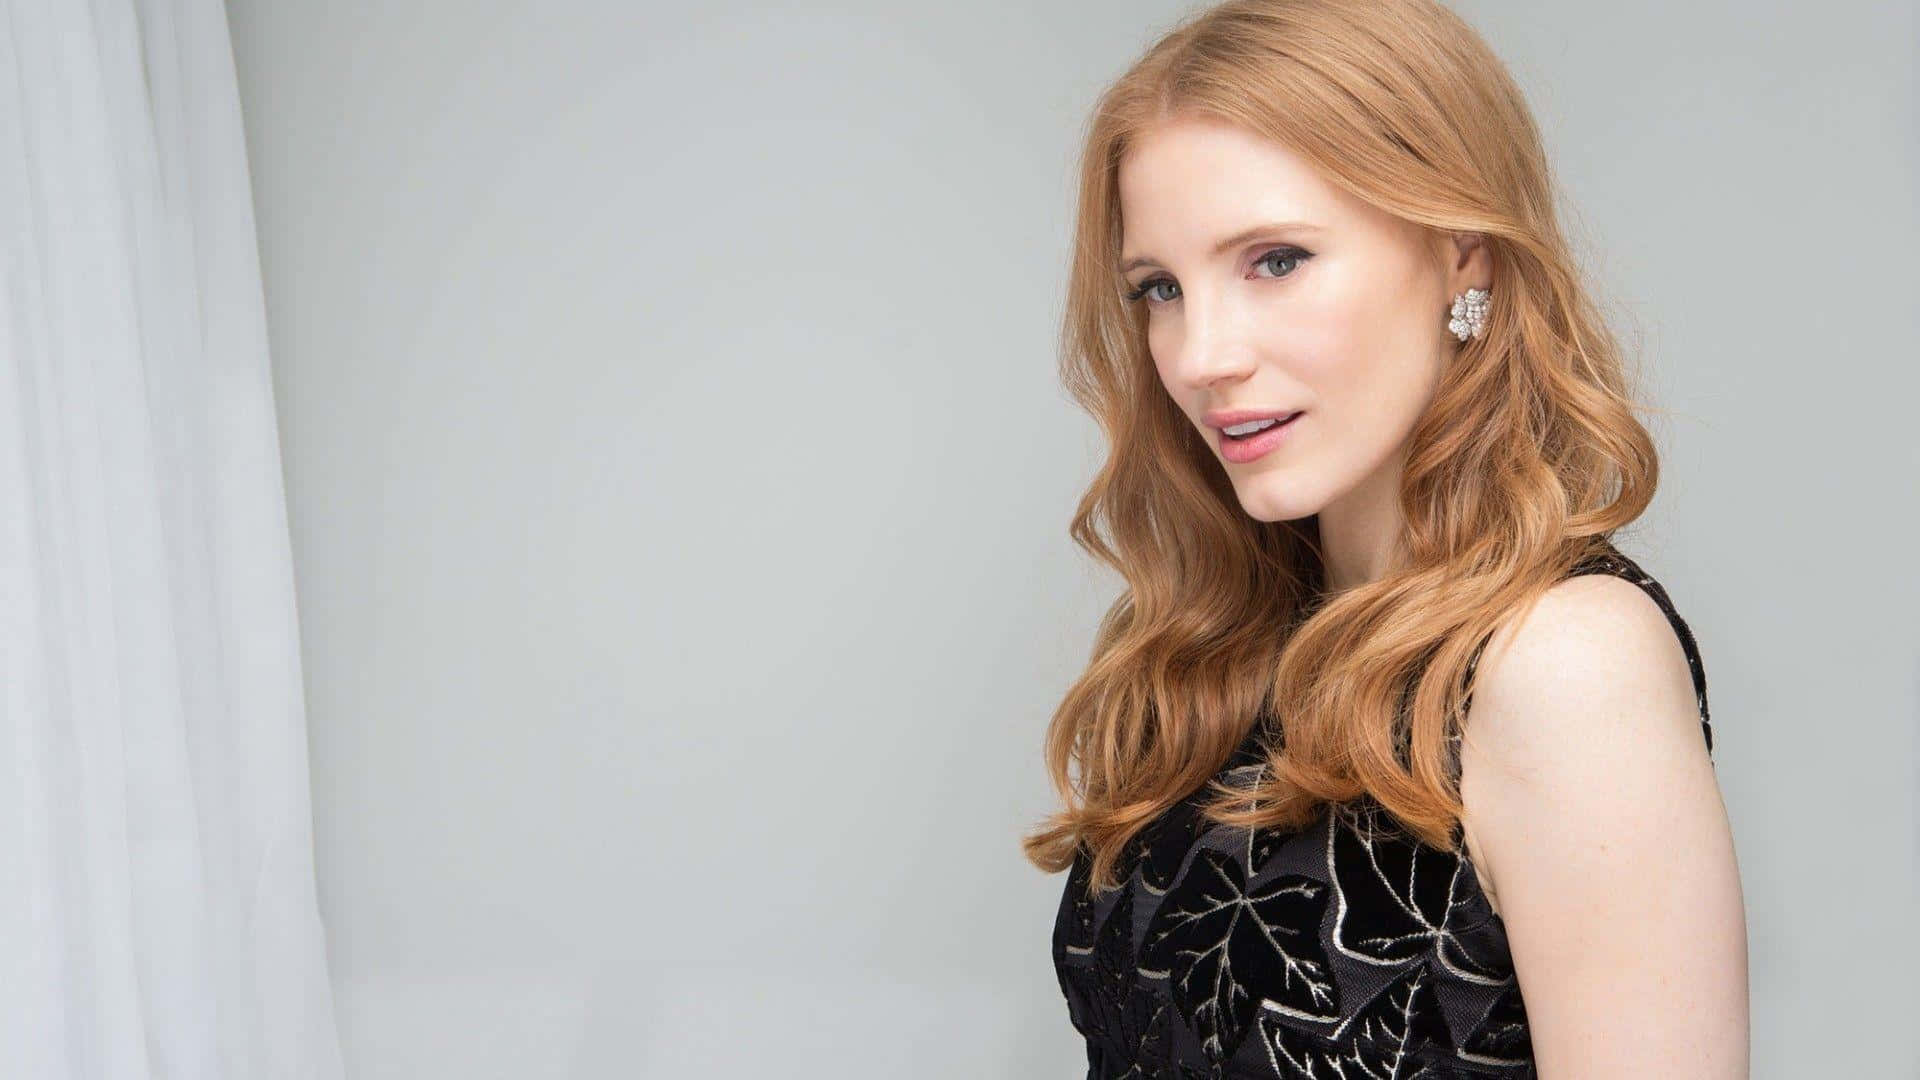 Jessica Chastain Radiant Close-Up Portrait Wallpaper